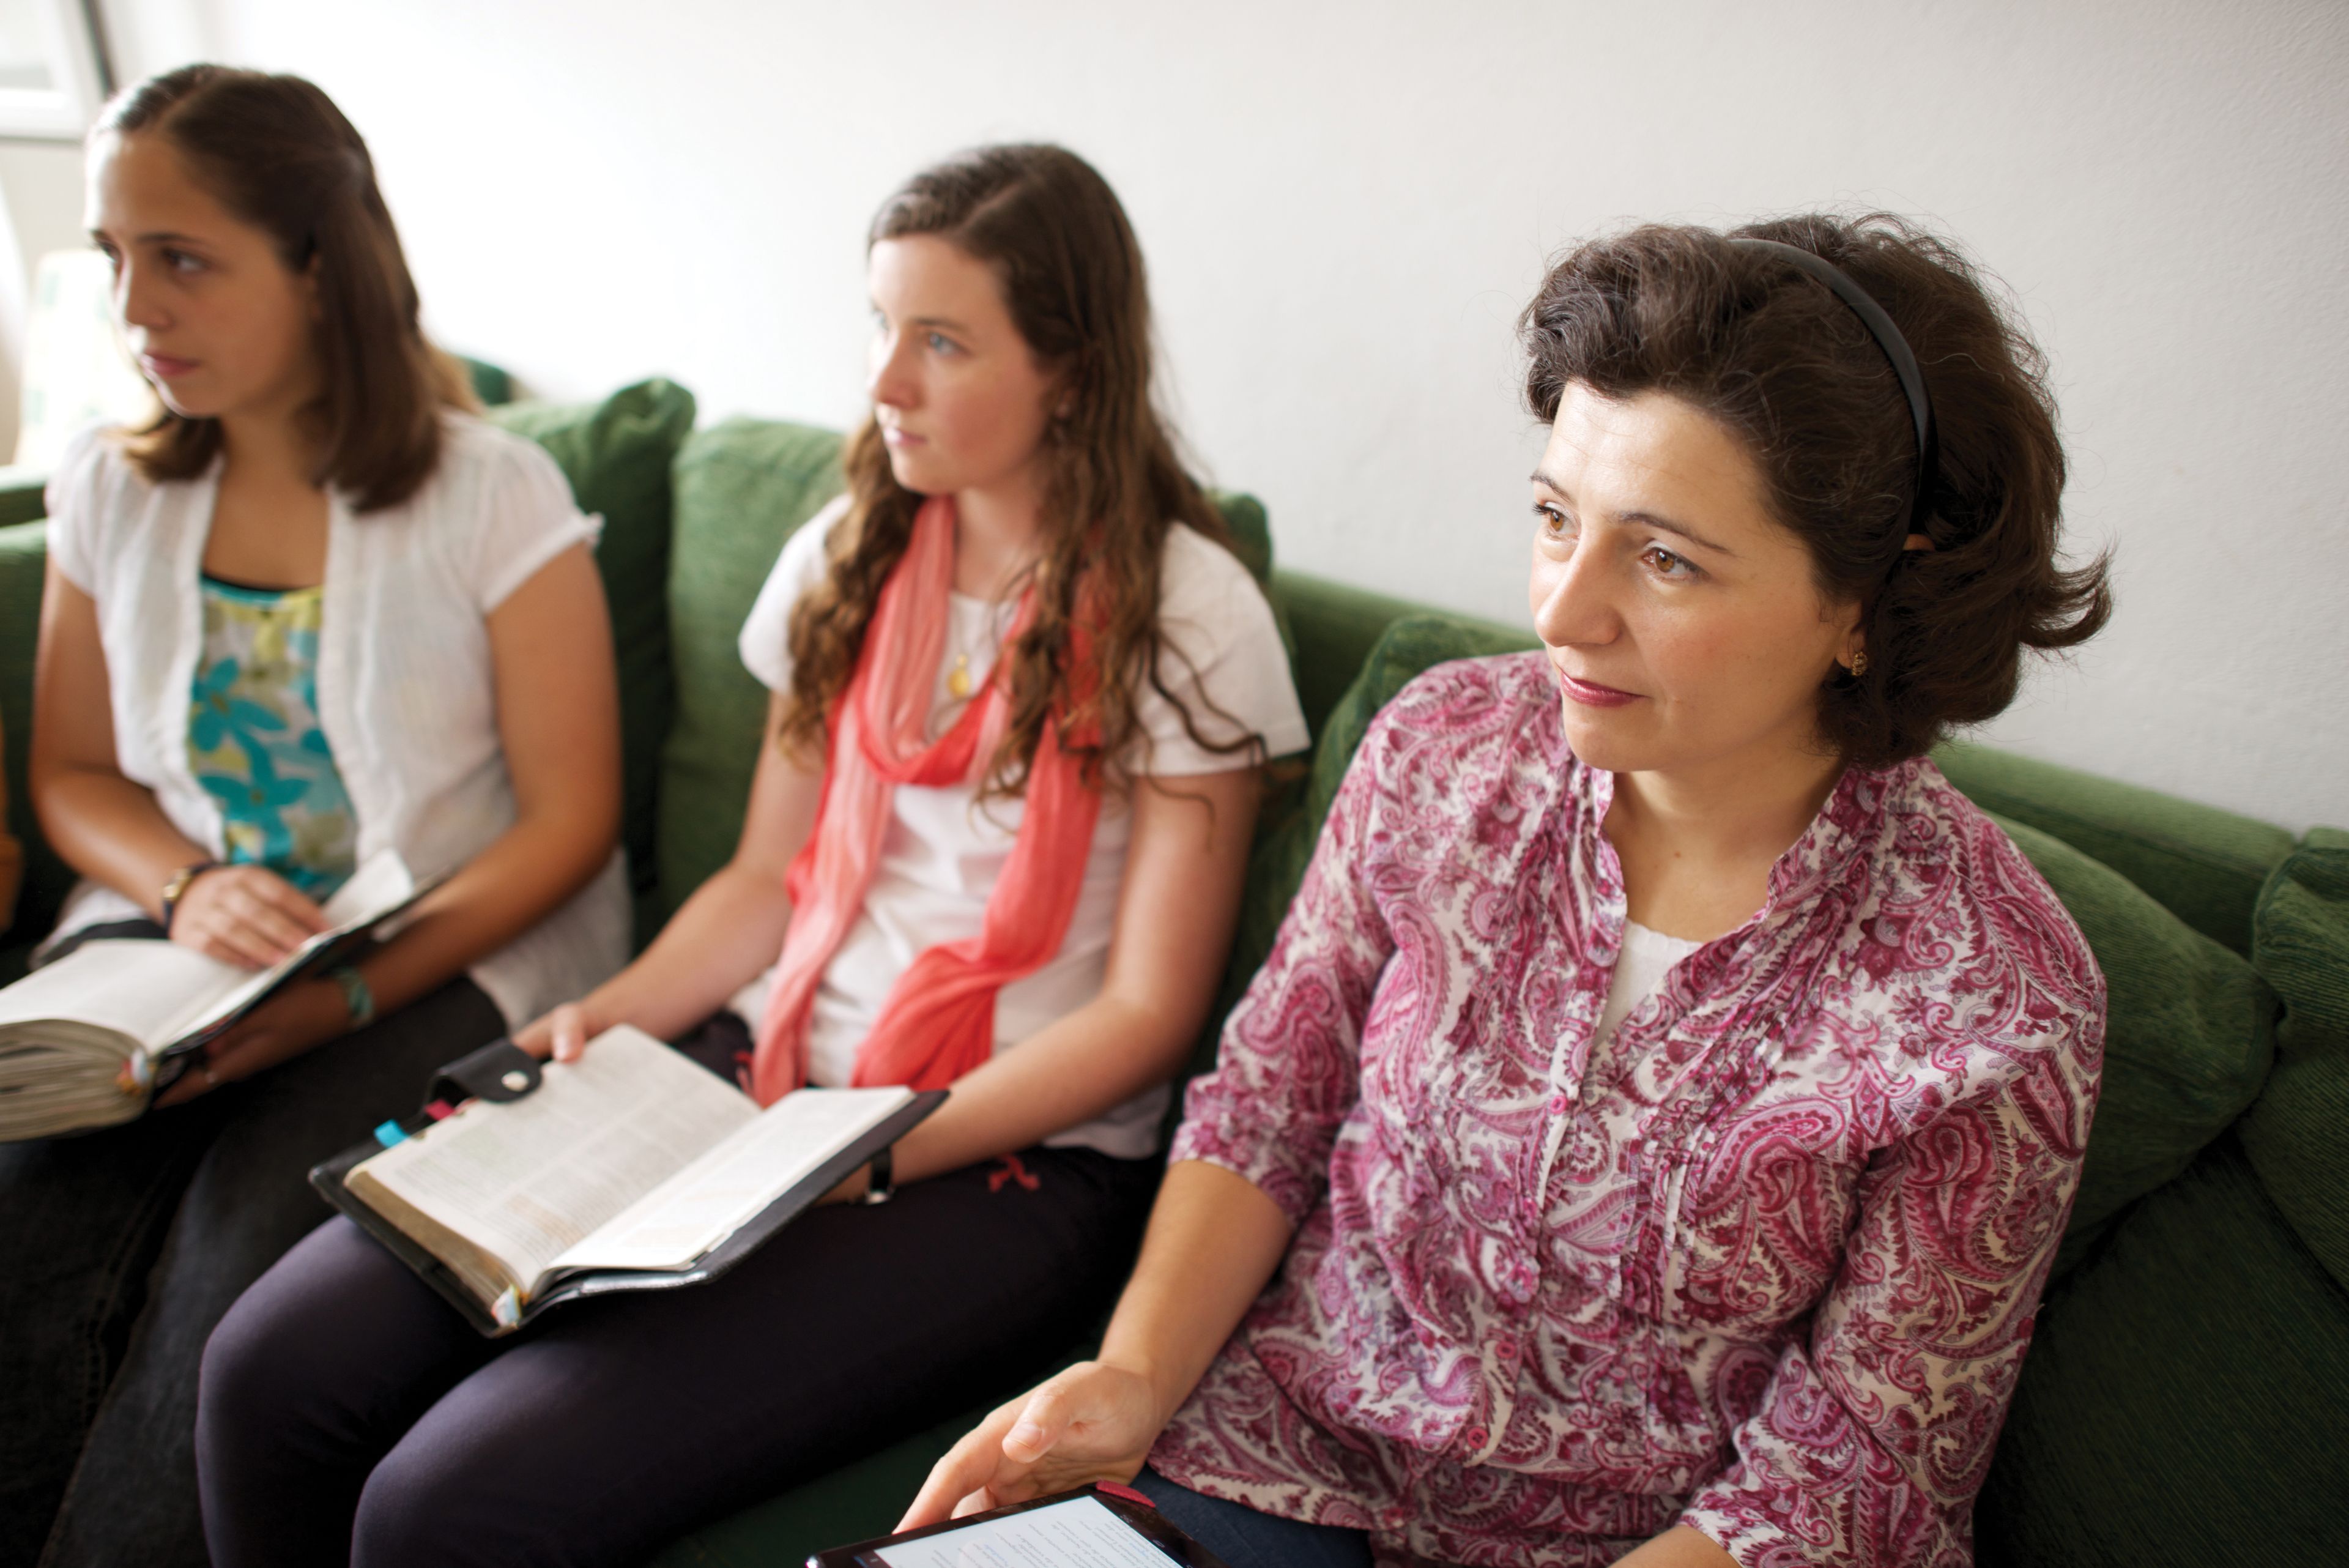 Mother and daughters studying scriptures together in Portugal.